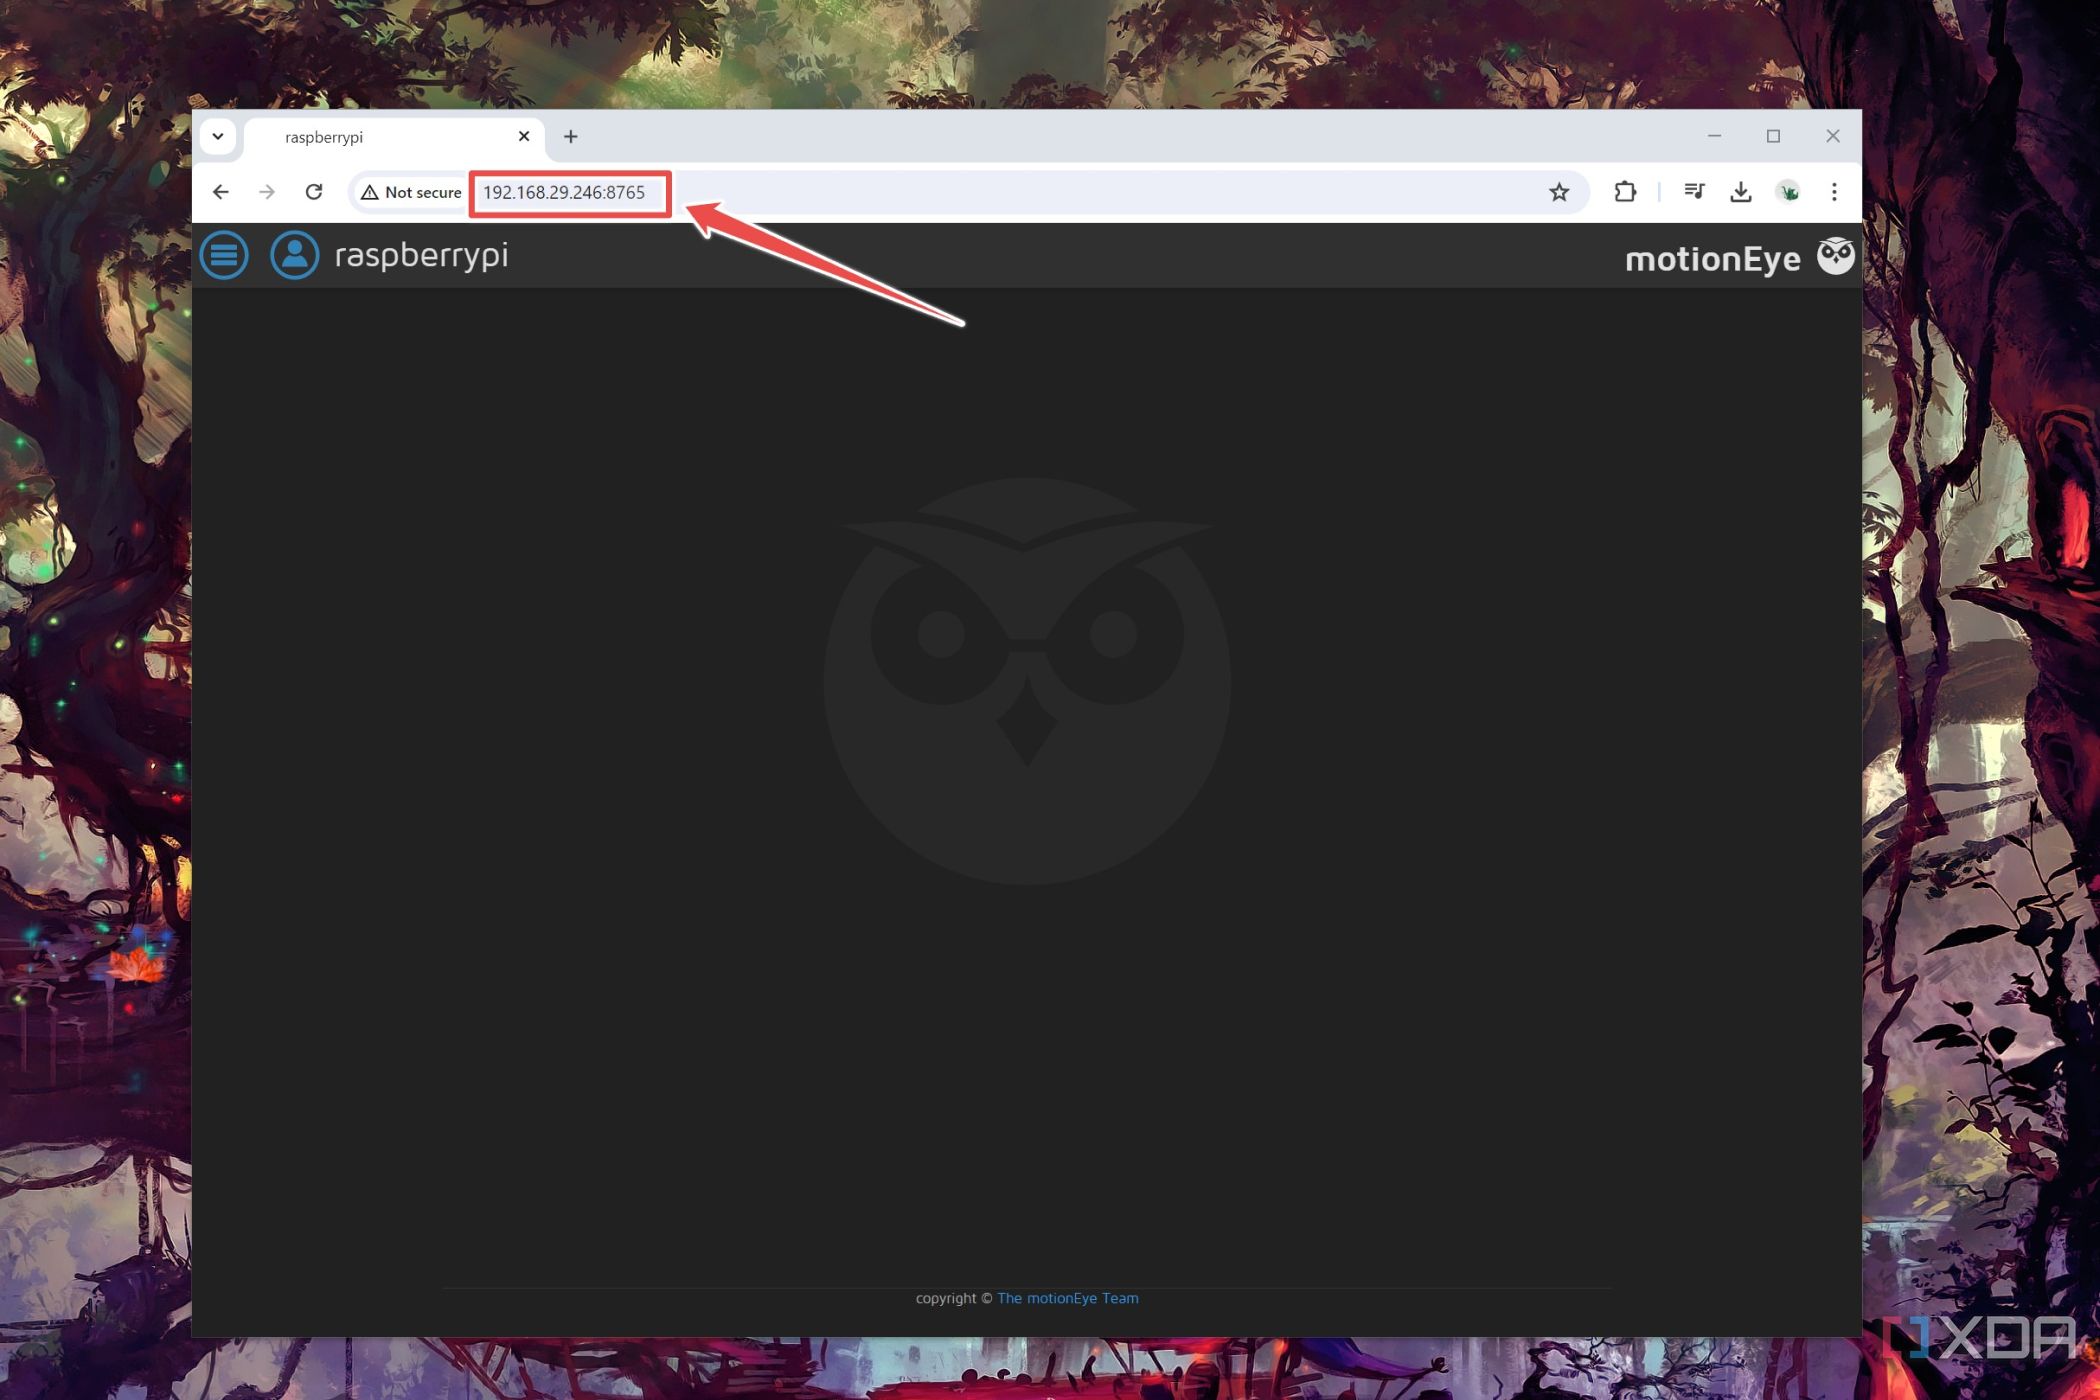 The URL used to open the MotionEye web interface